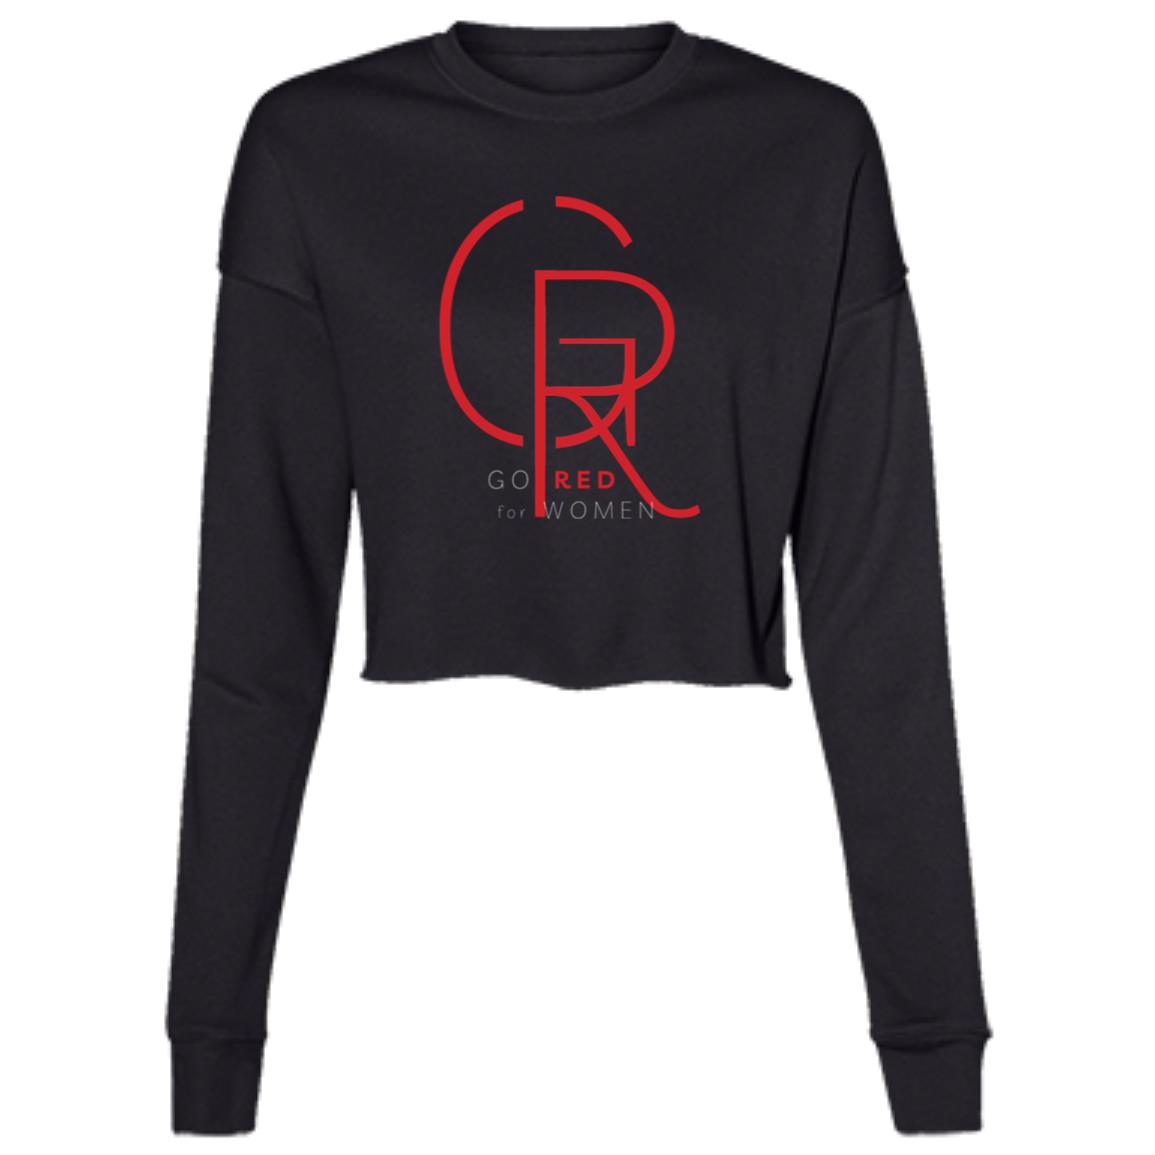 Black Cropped long-sleeved Fleece Crew with big lettered monogramed GR along with Go Red for Women Text below